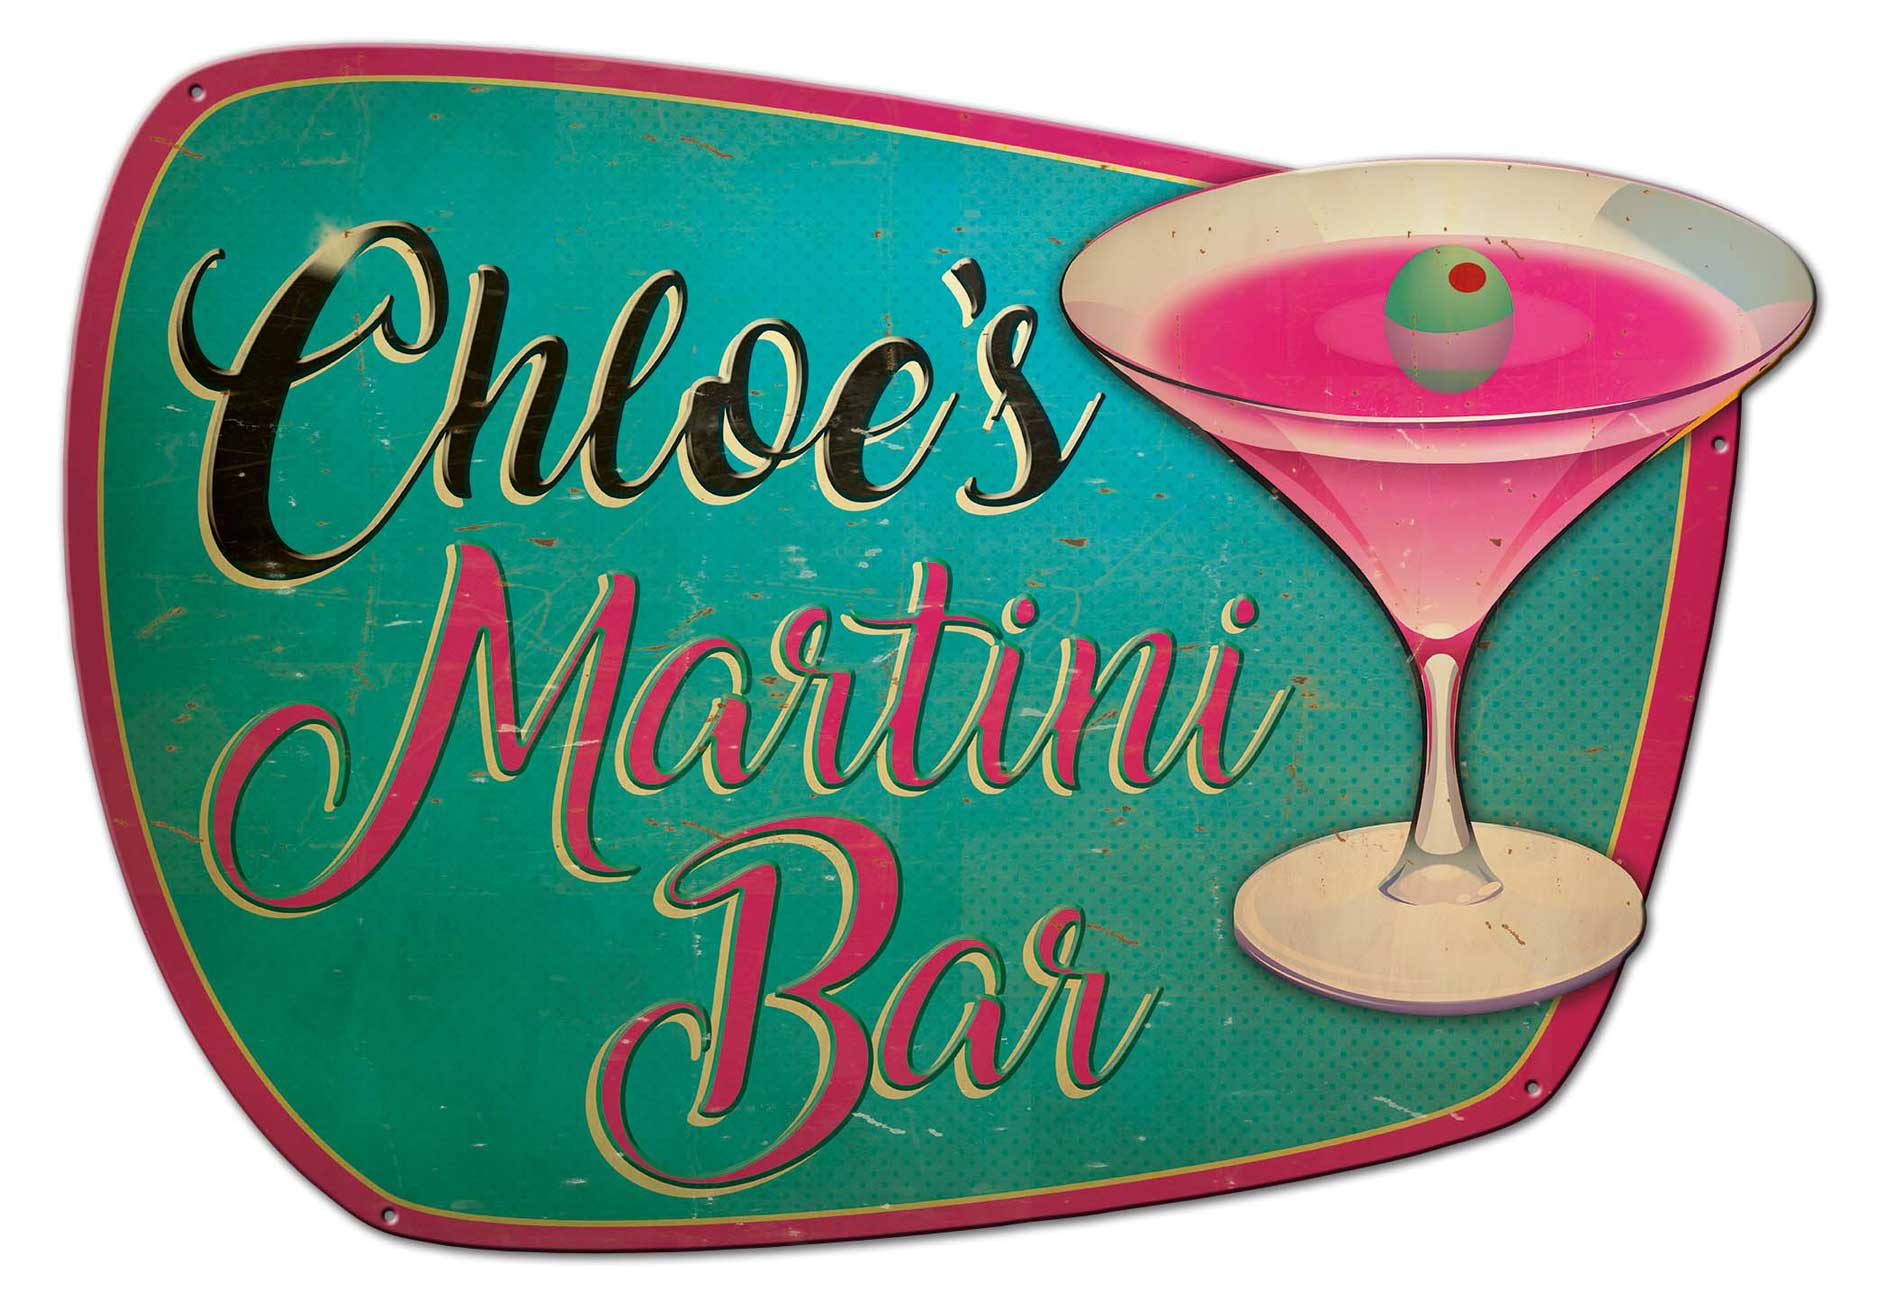  MArtini Bar Vintage Sign - Personalized